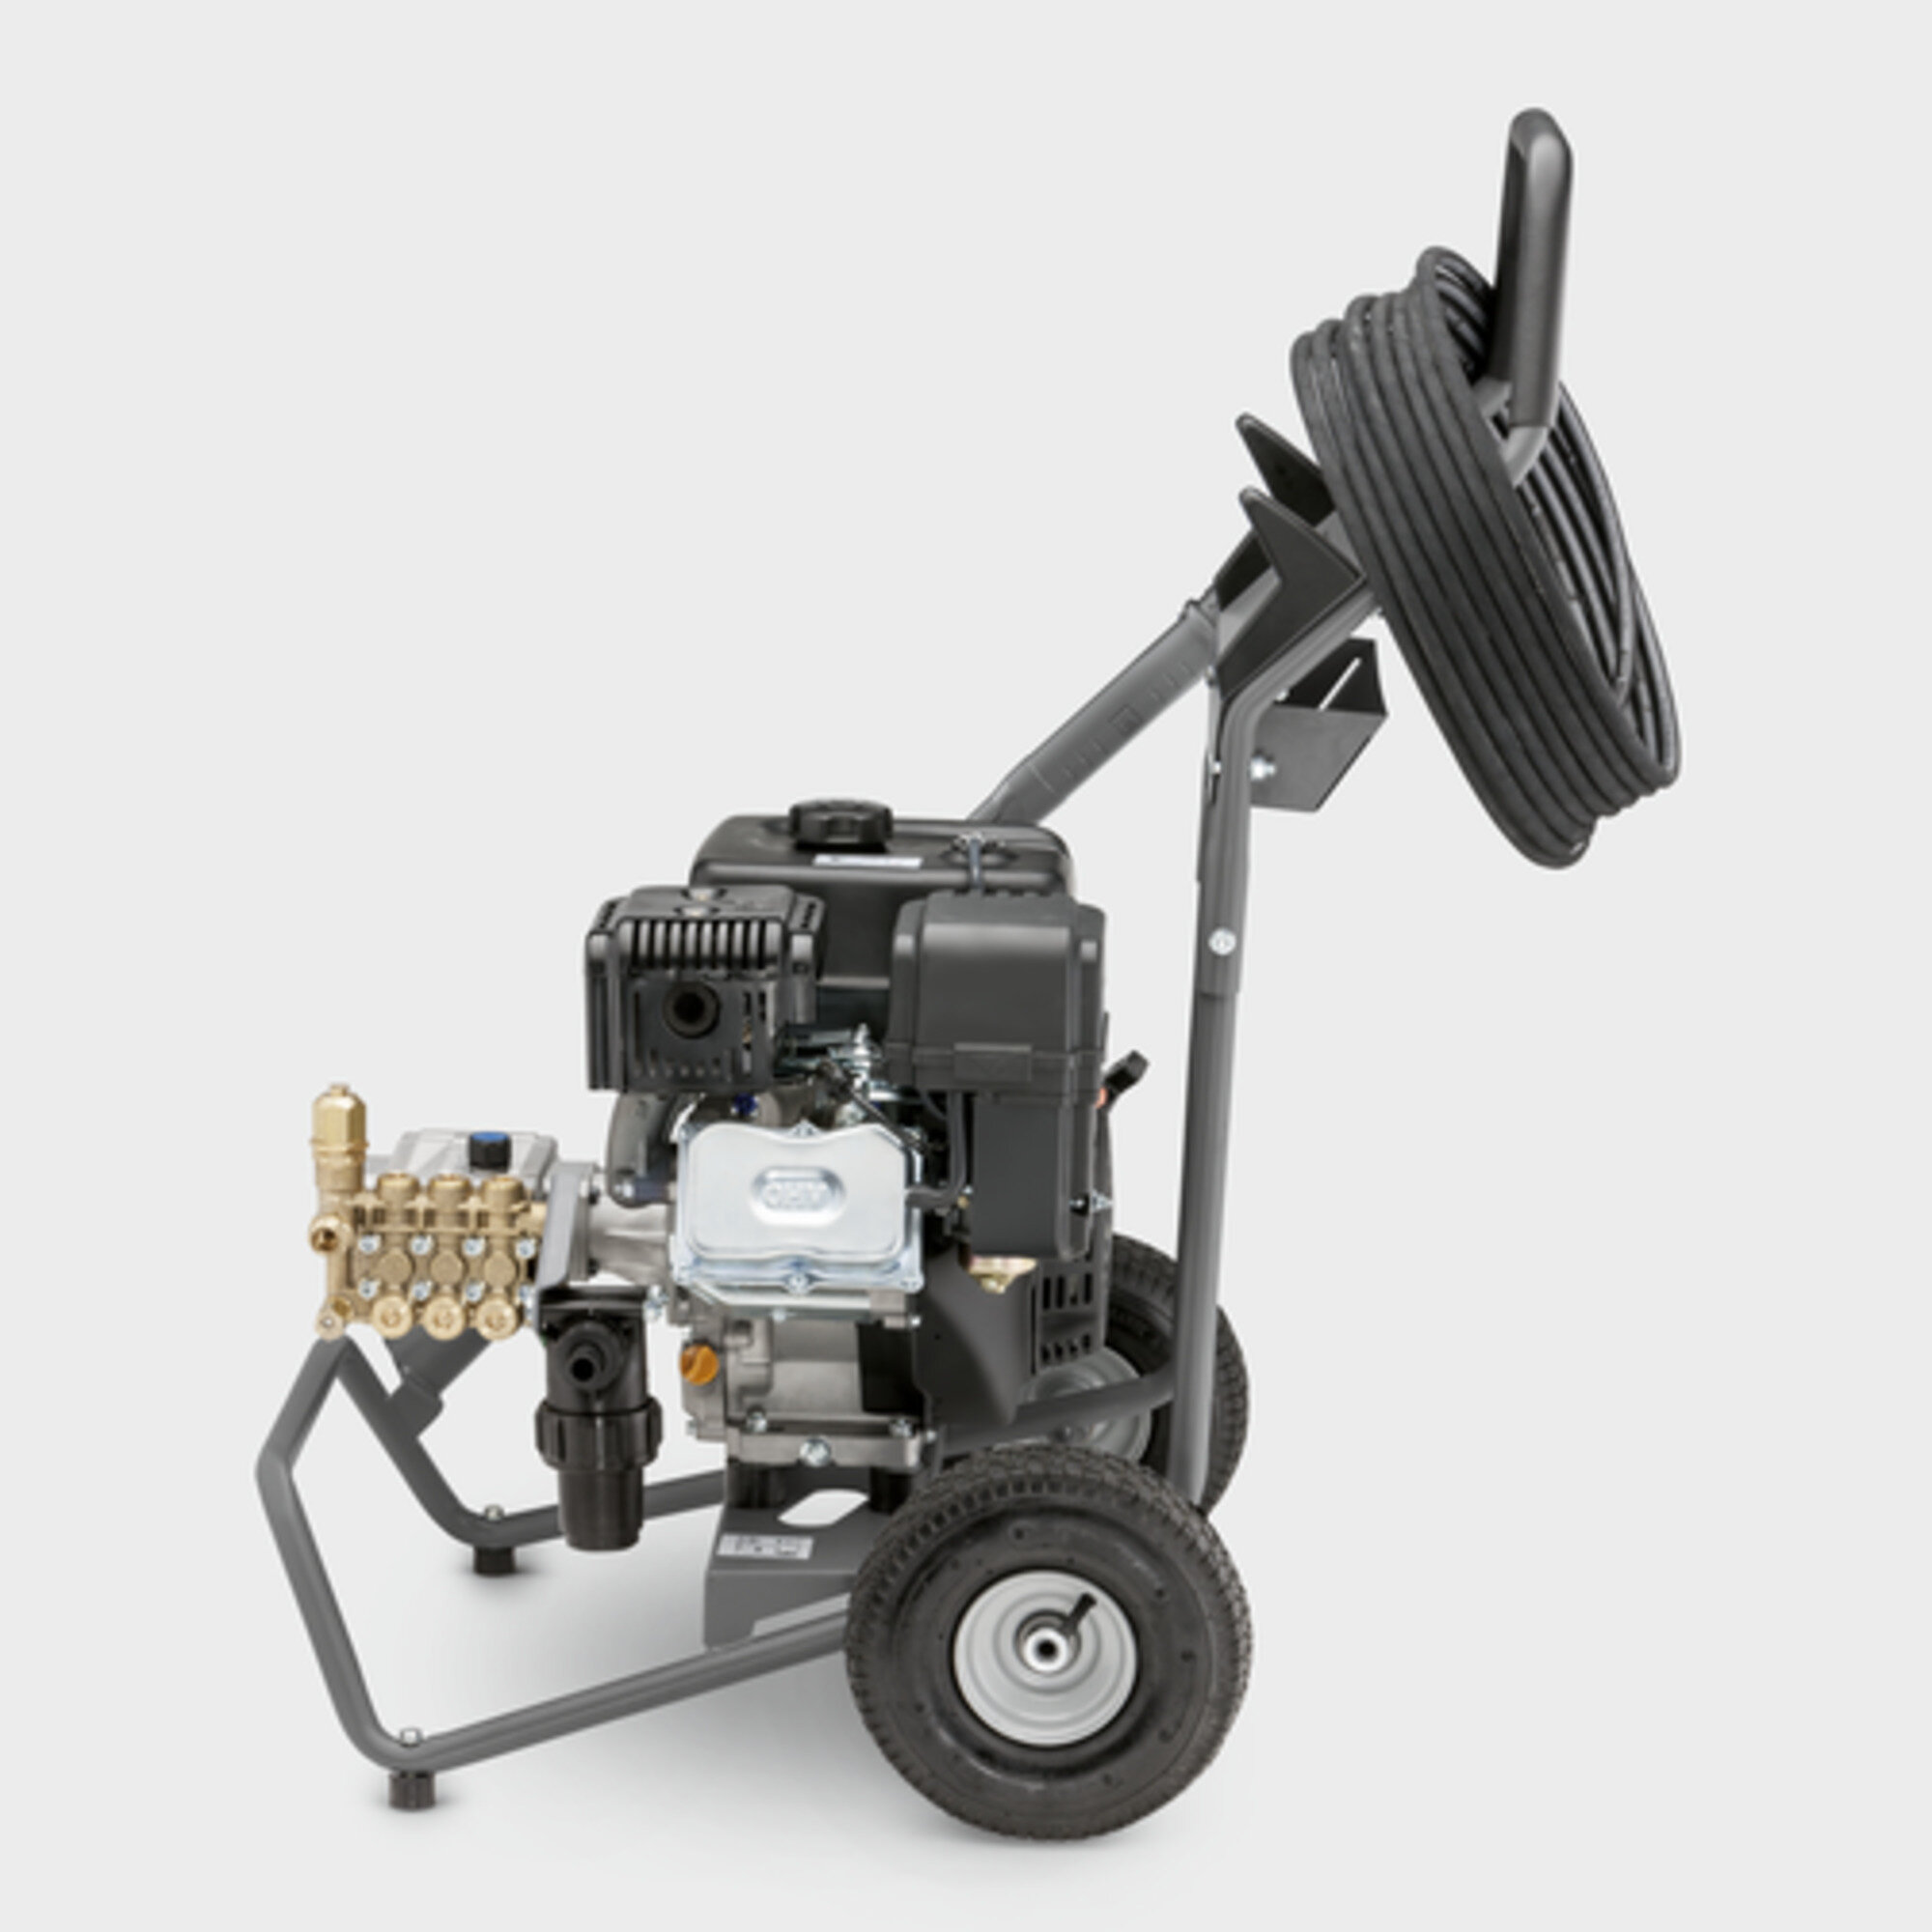 High pressure washer HD 8/23 G: Outstanding mobility